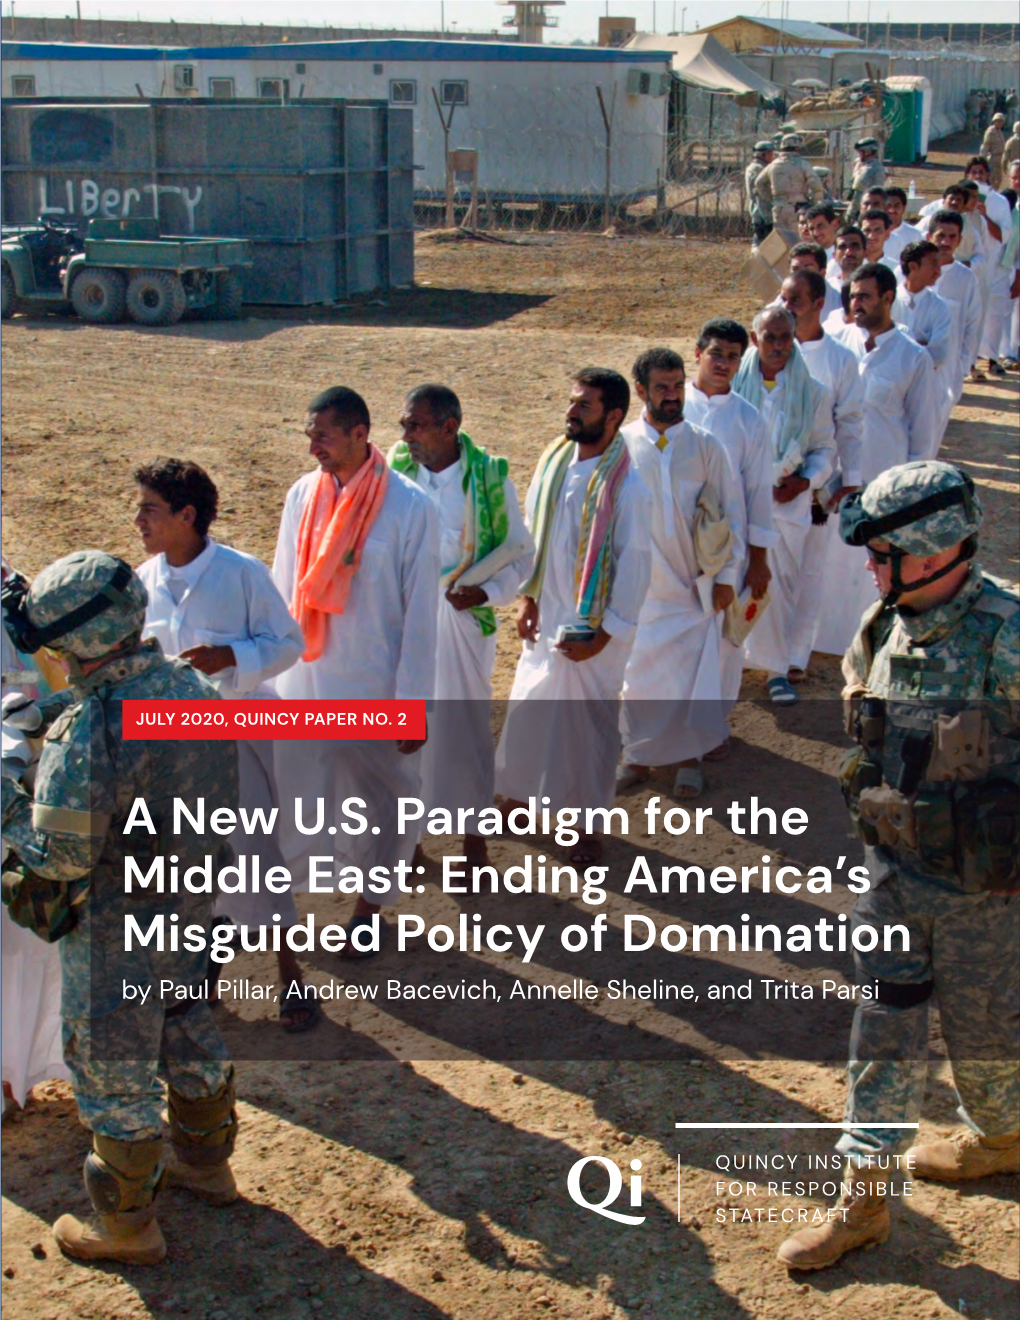 A New U.S. Paradigm for the Middle East: Ending America's Misguided Policy of Domination